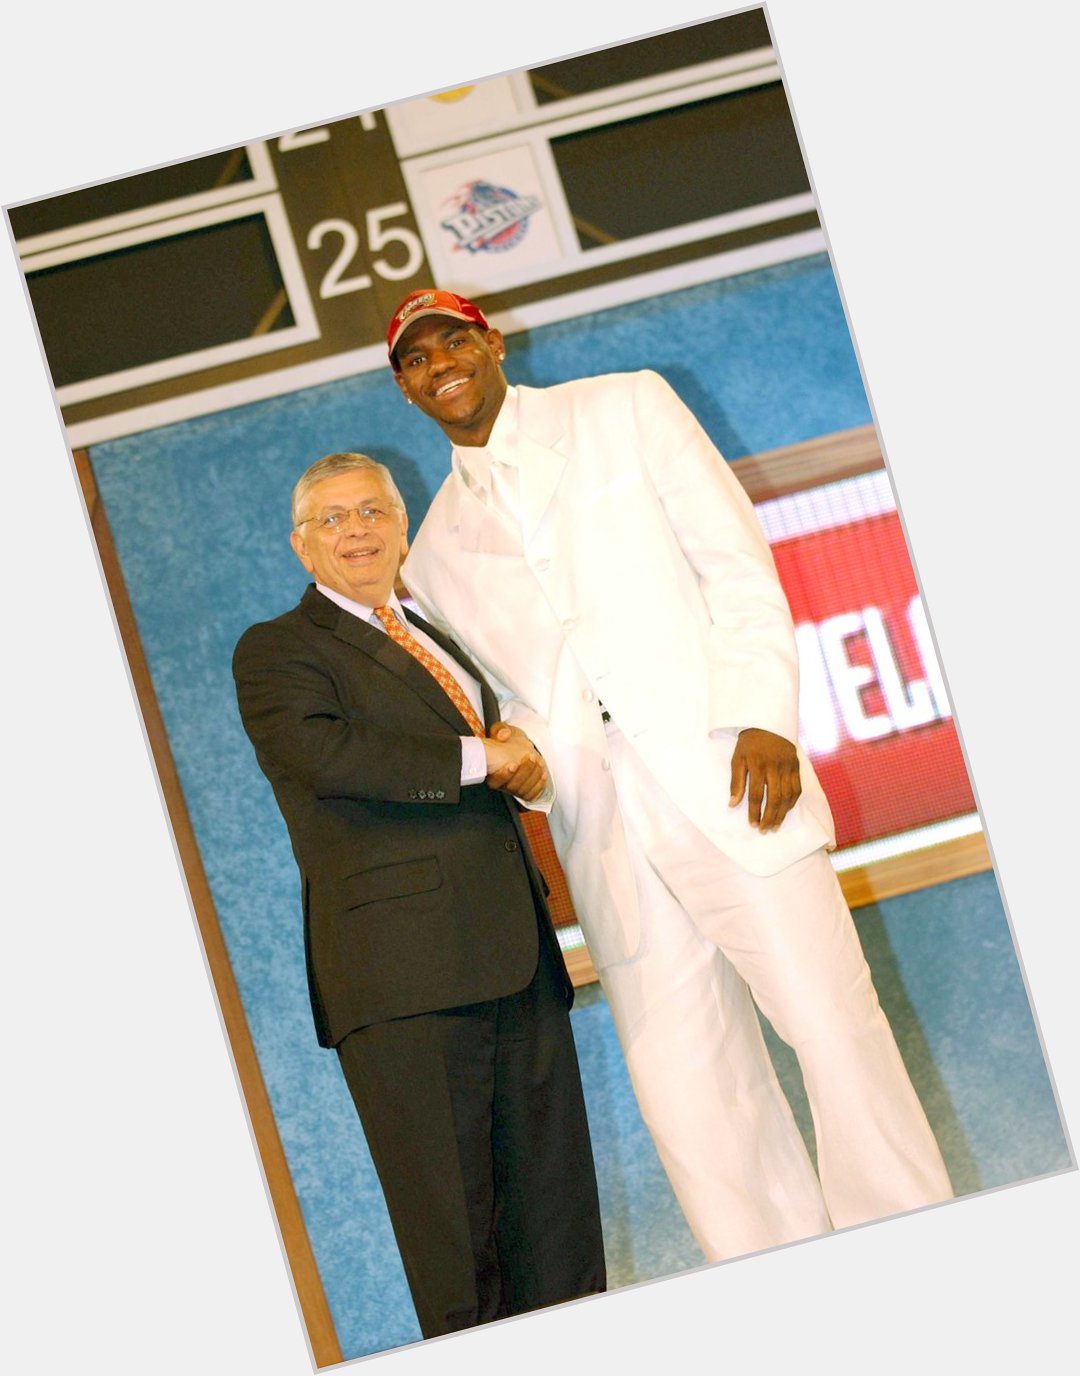 He did much more than introduce the greats. He introduced the NBA to the world. 

Happy birthday, David Stern. 